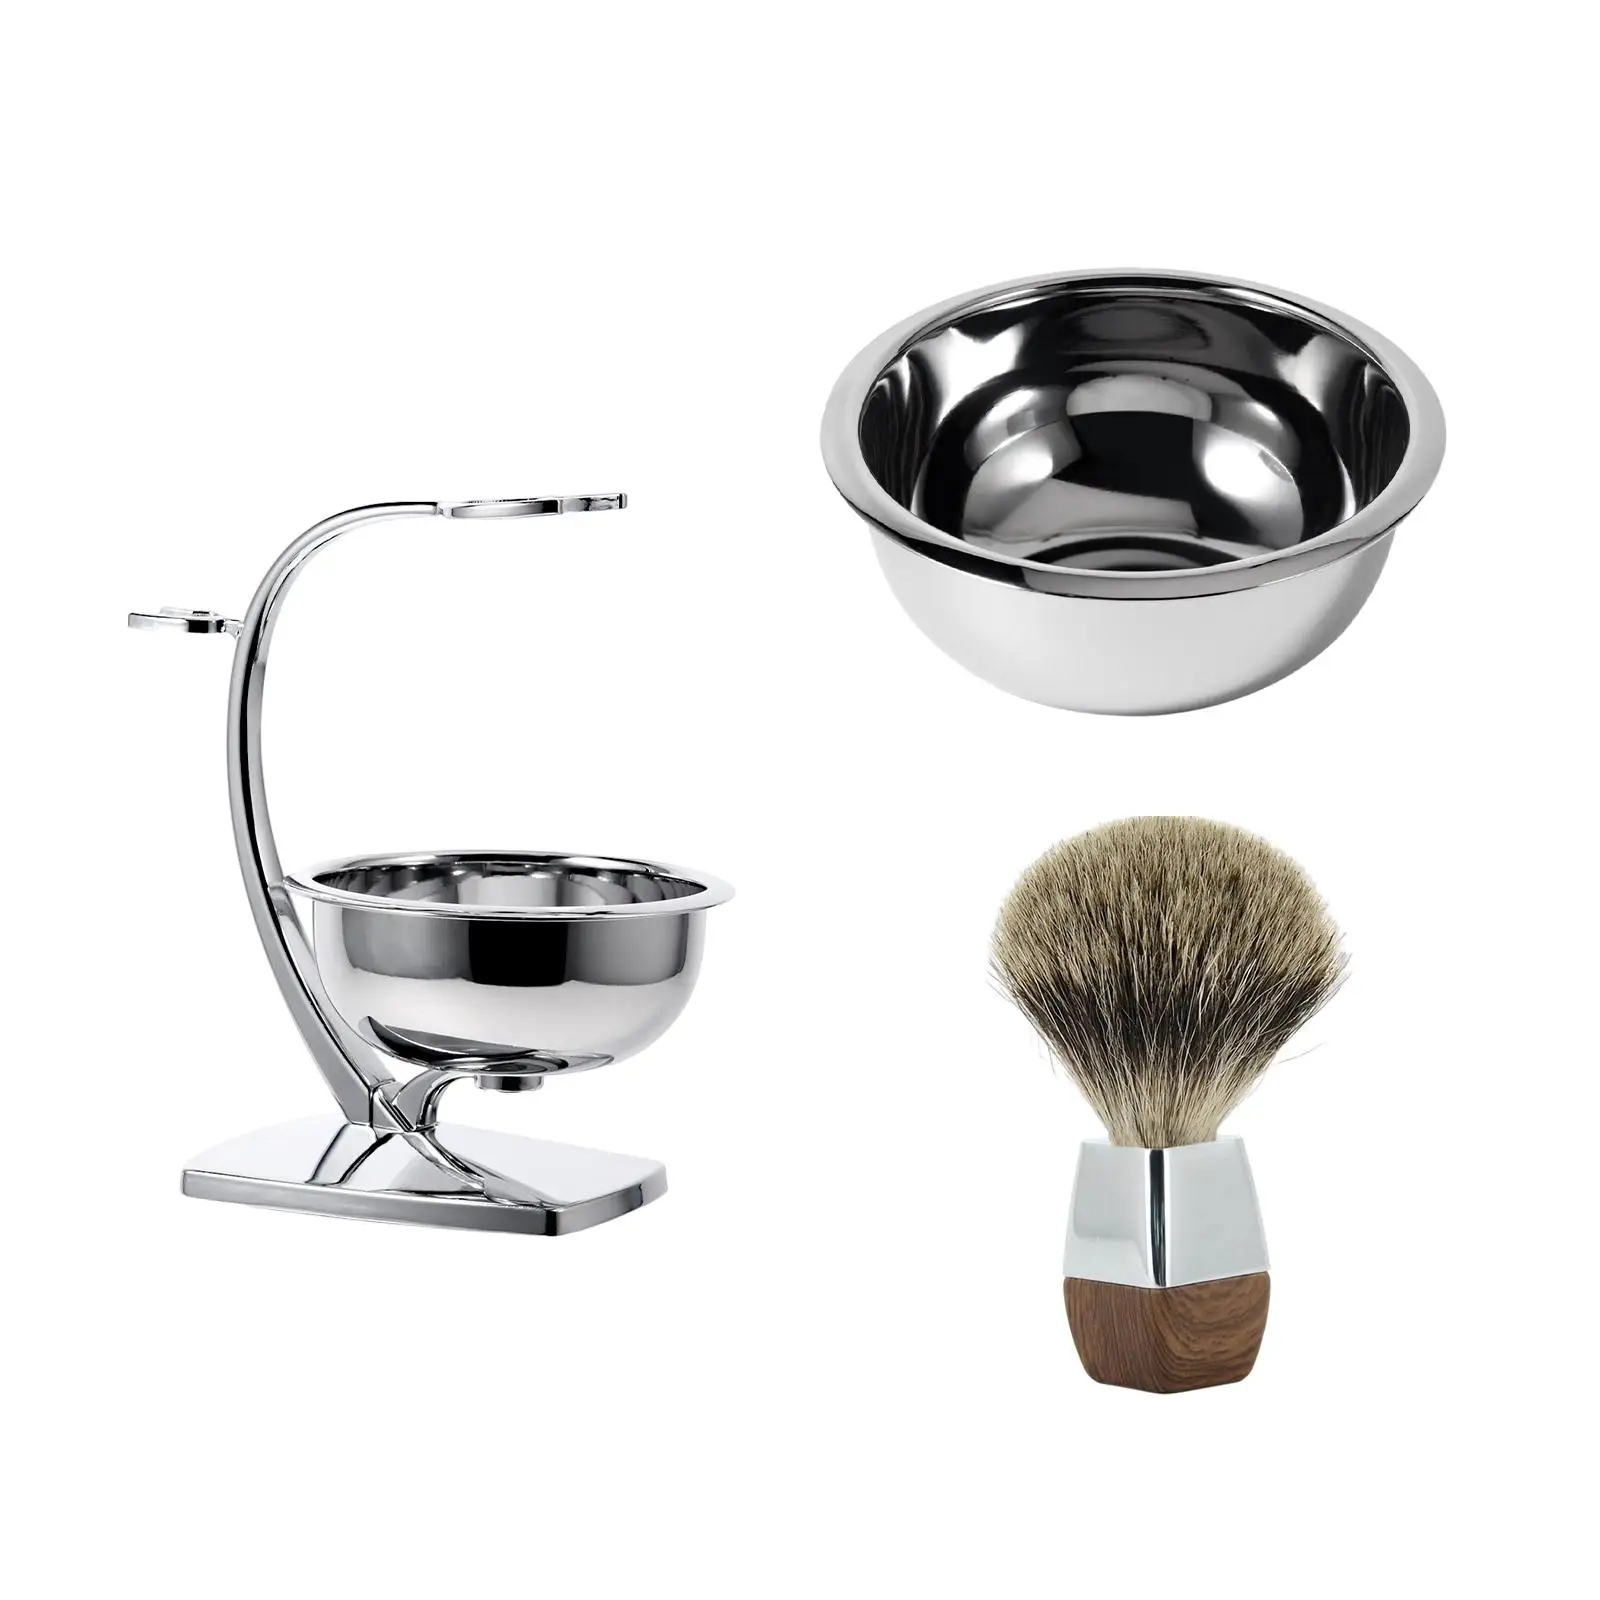 High Quality Shaving Set for Men Stainless Steel Gift Grooming for Father Husband Home Fathers Day Birthday